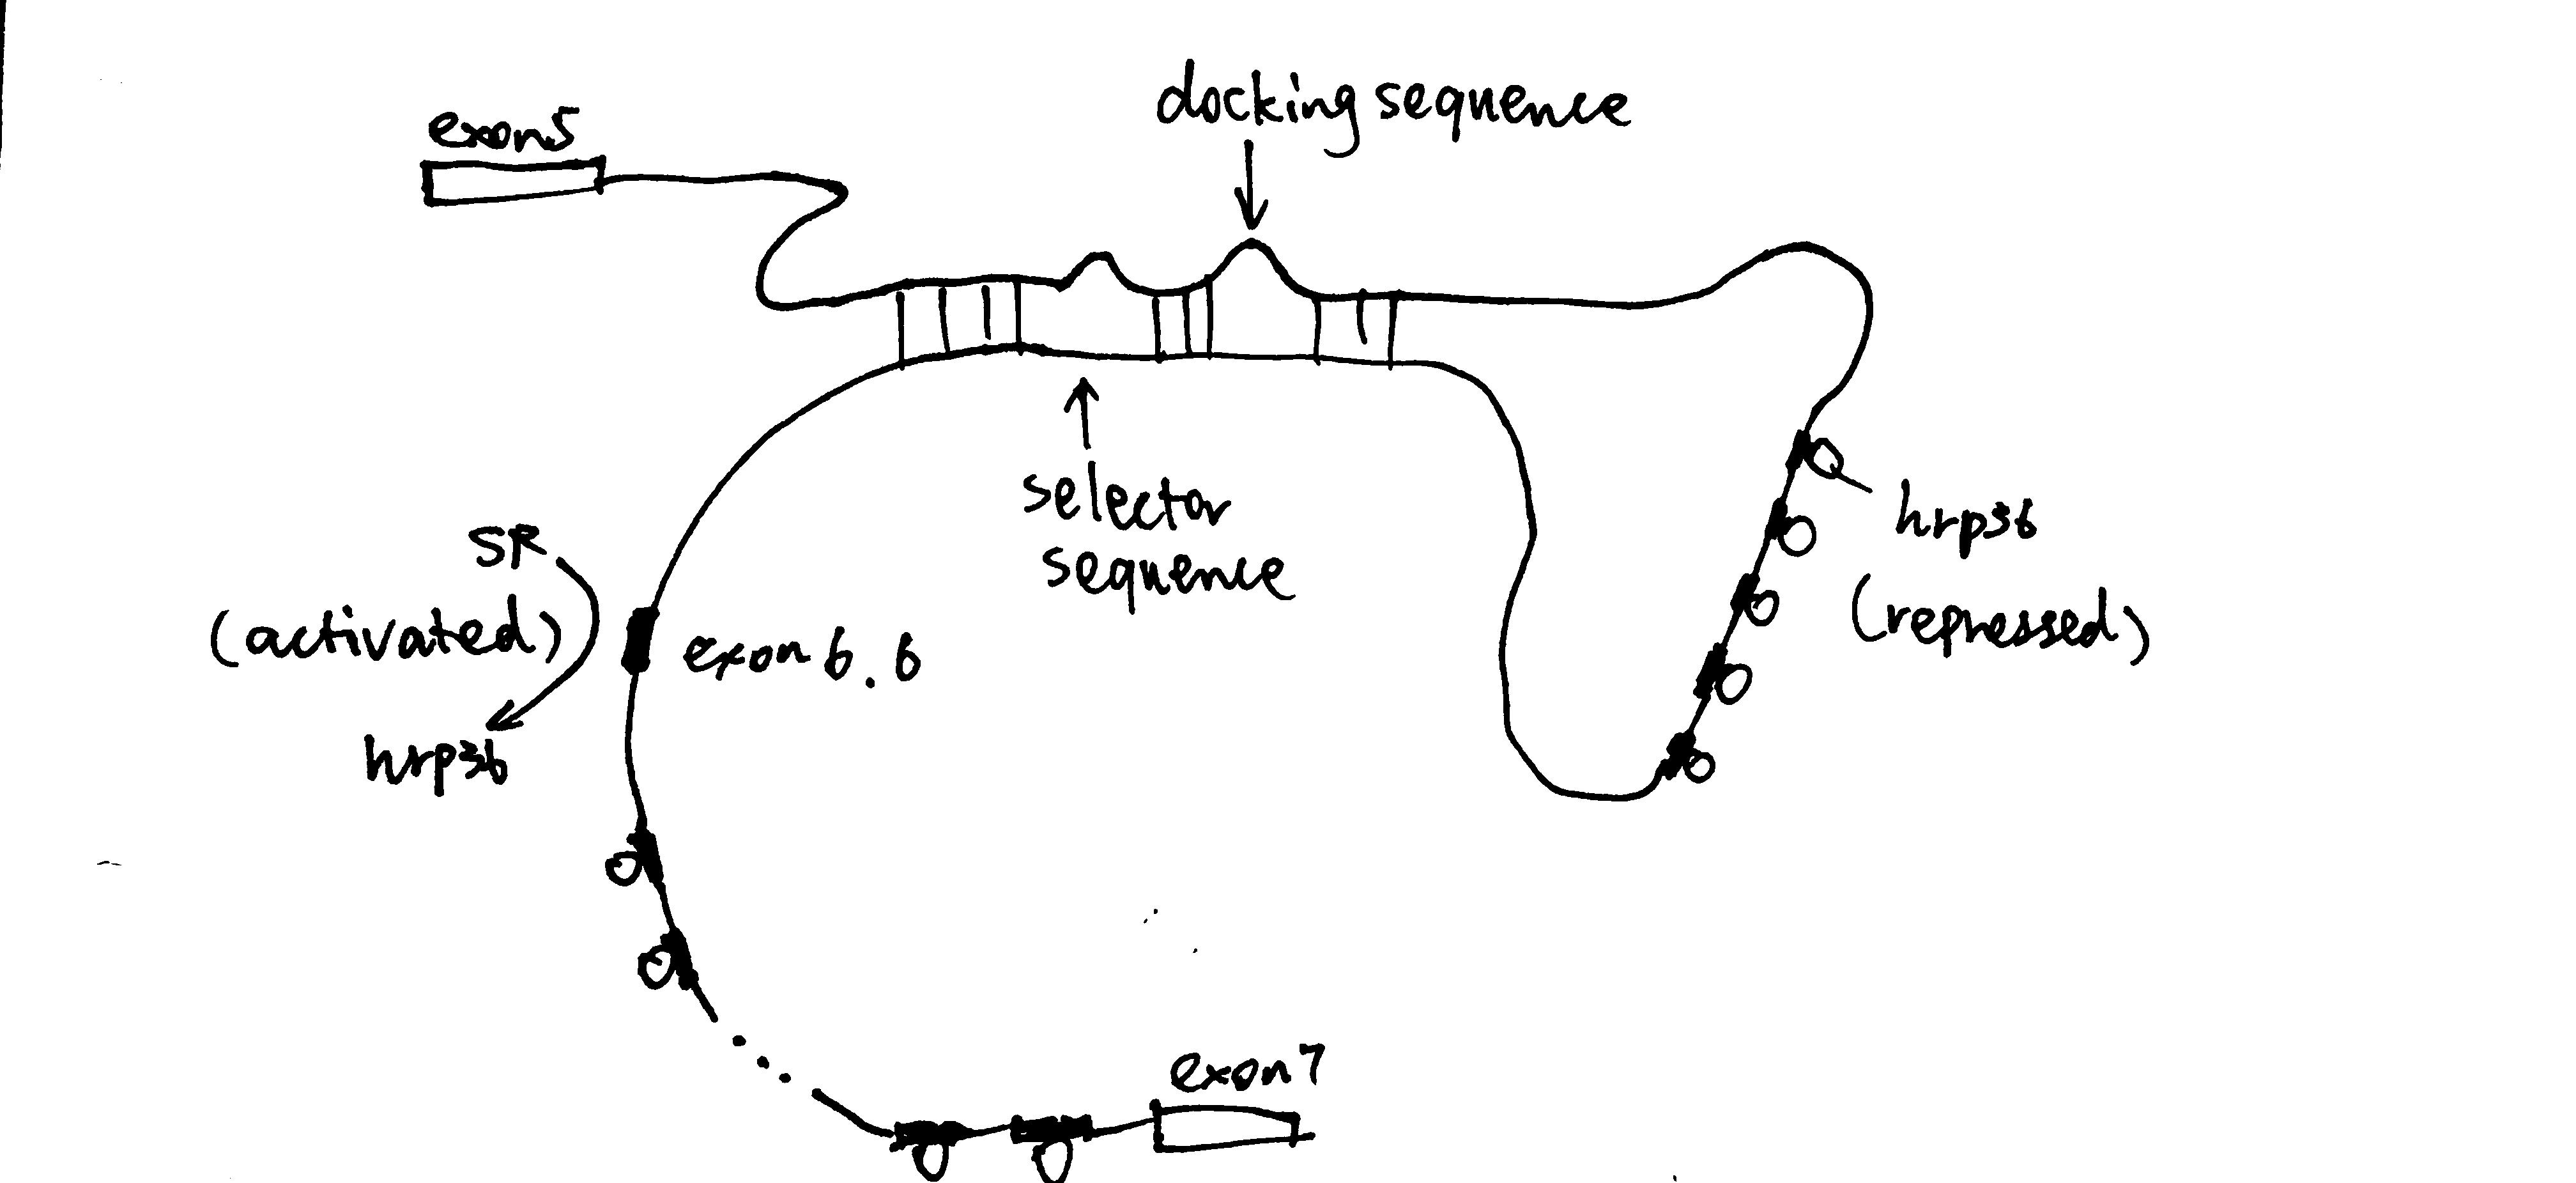 hrp36 binds to all axon6 variants and represses their inclusion in the mature mRNA. When the cis-acting RNA selector sequence upstream of a specific exon (in this case 6.6) pairs with the docking site, it results in activation of the exon immediately downstream.